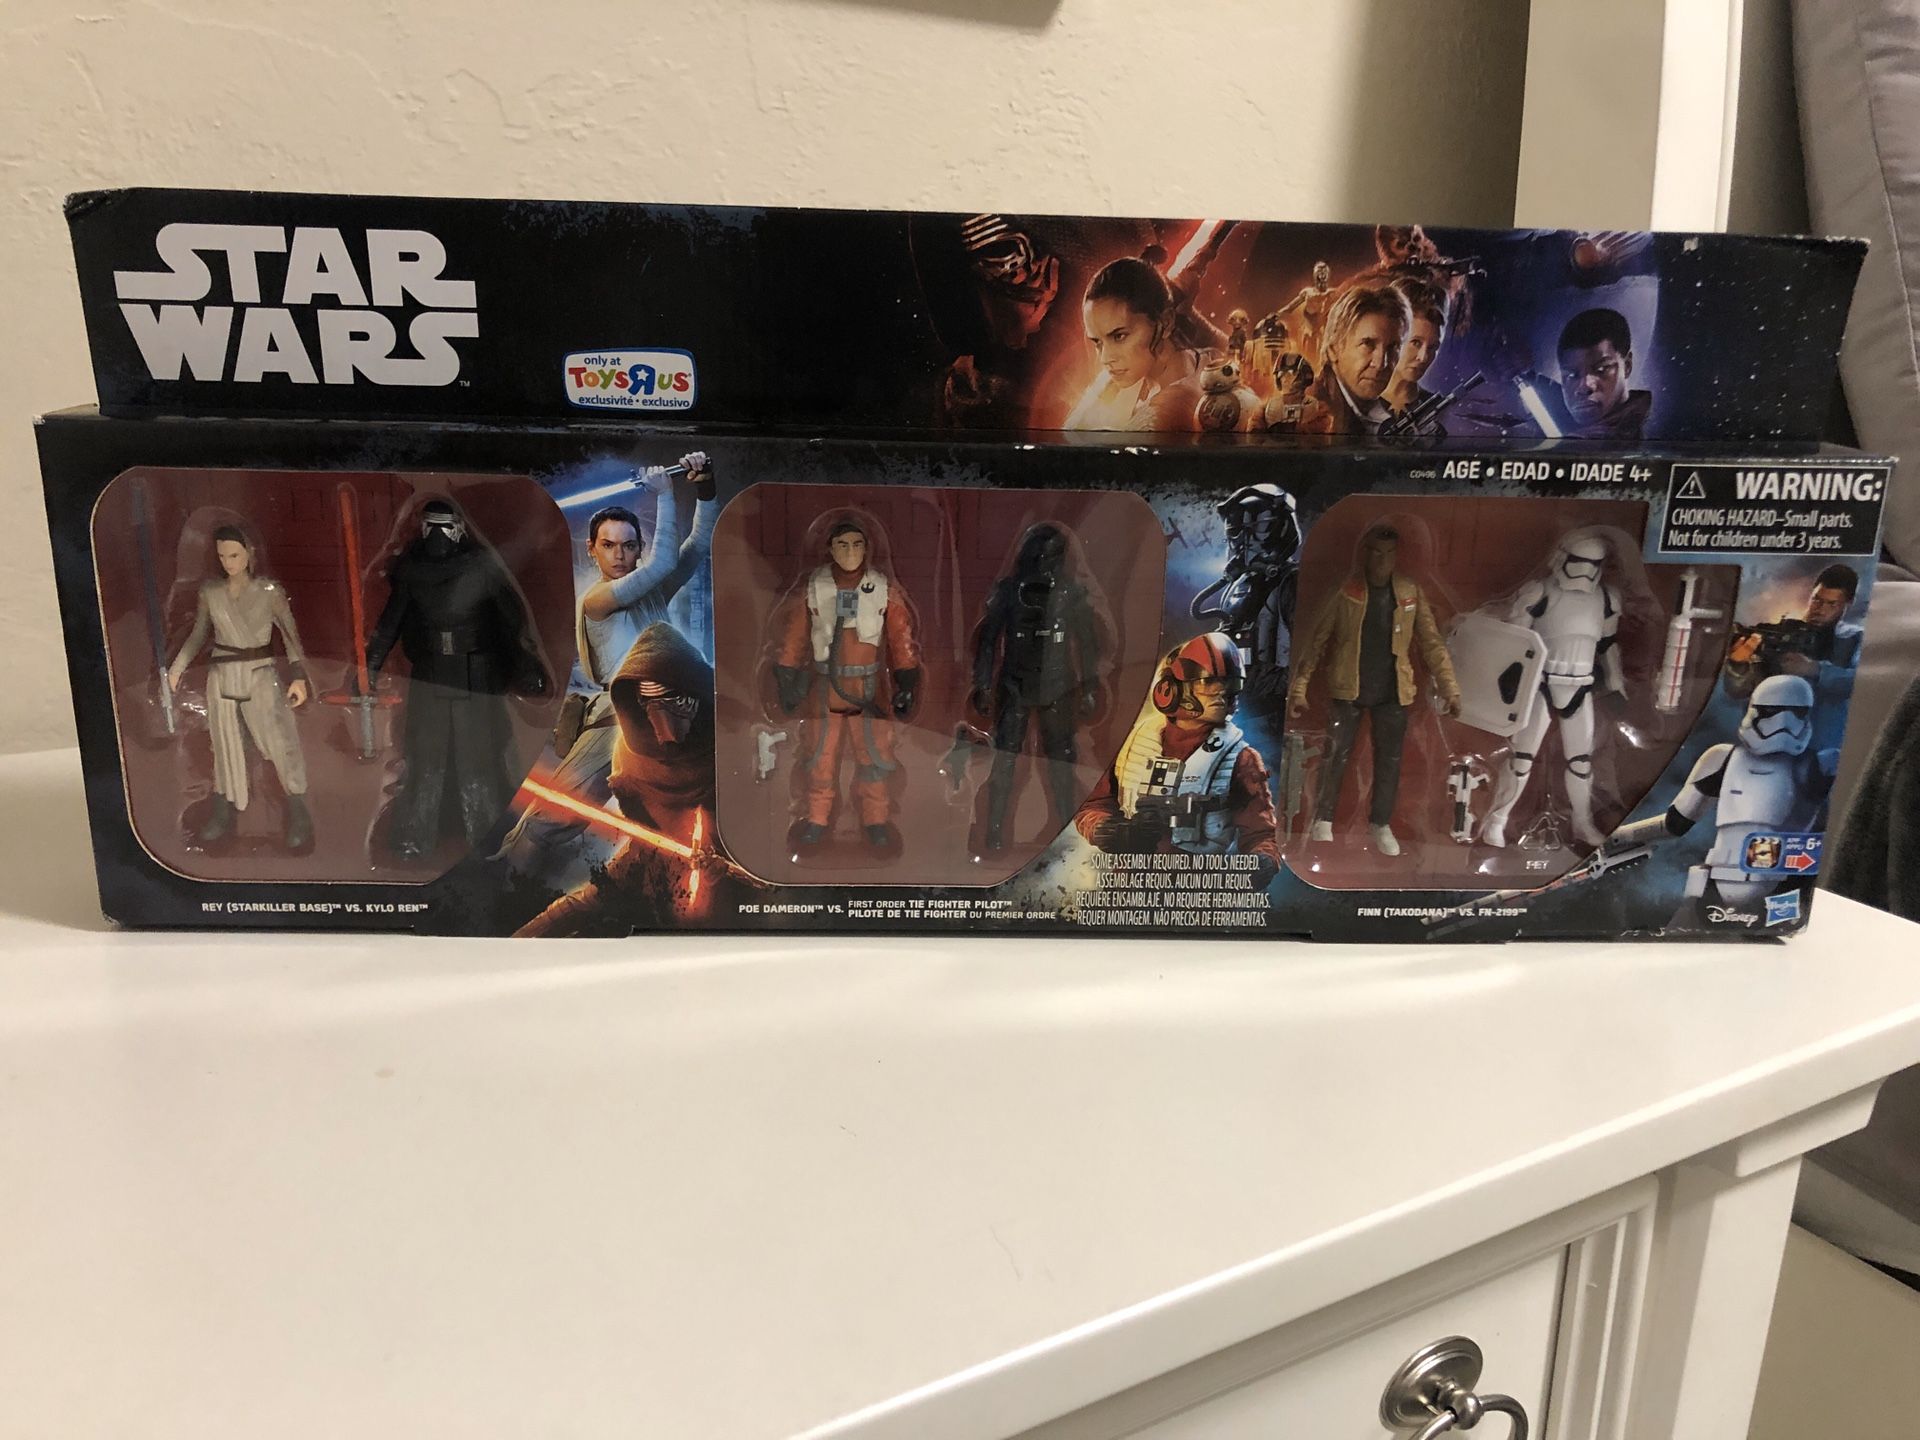 Star Wars Toys “R” Us exclusive the force awakens six pack figure set brand new sealed